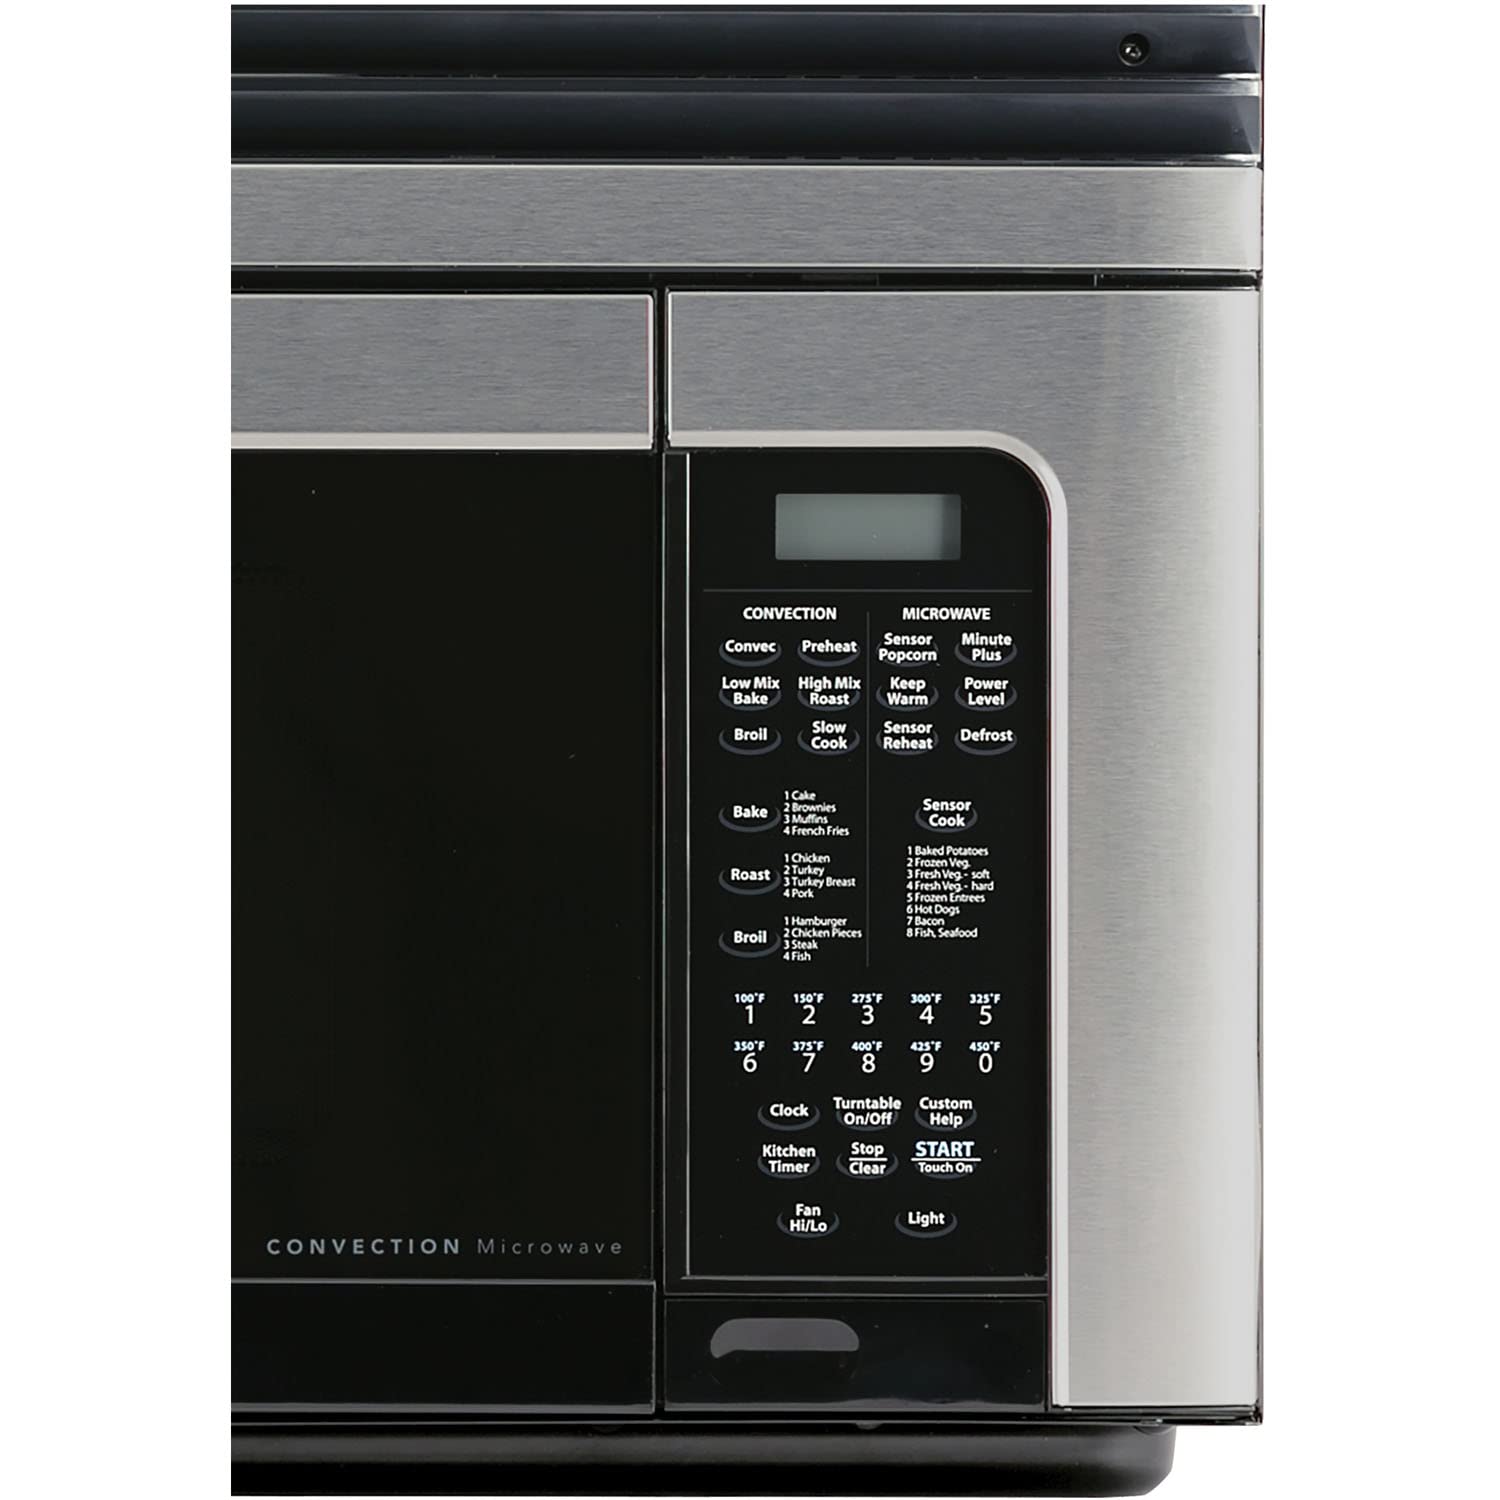 Sharp 1.1 Cu. Ft. 850W Over-The-Range Convection Microwave Oven, Stainless Steel (R1881lsy)